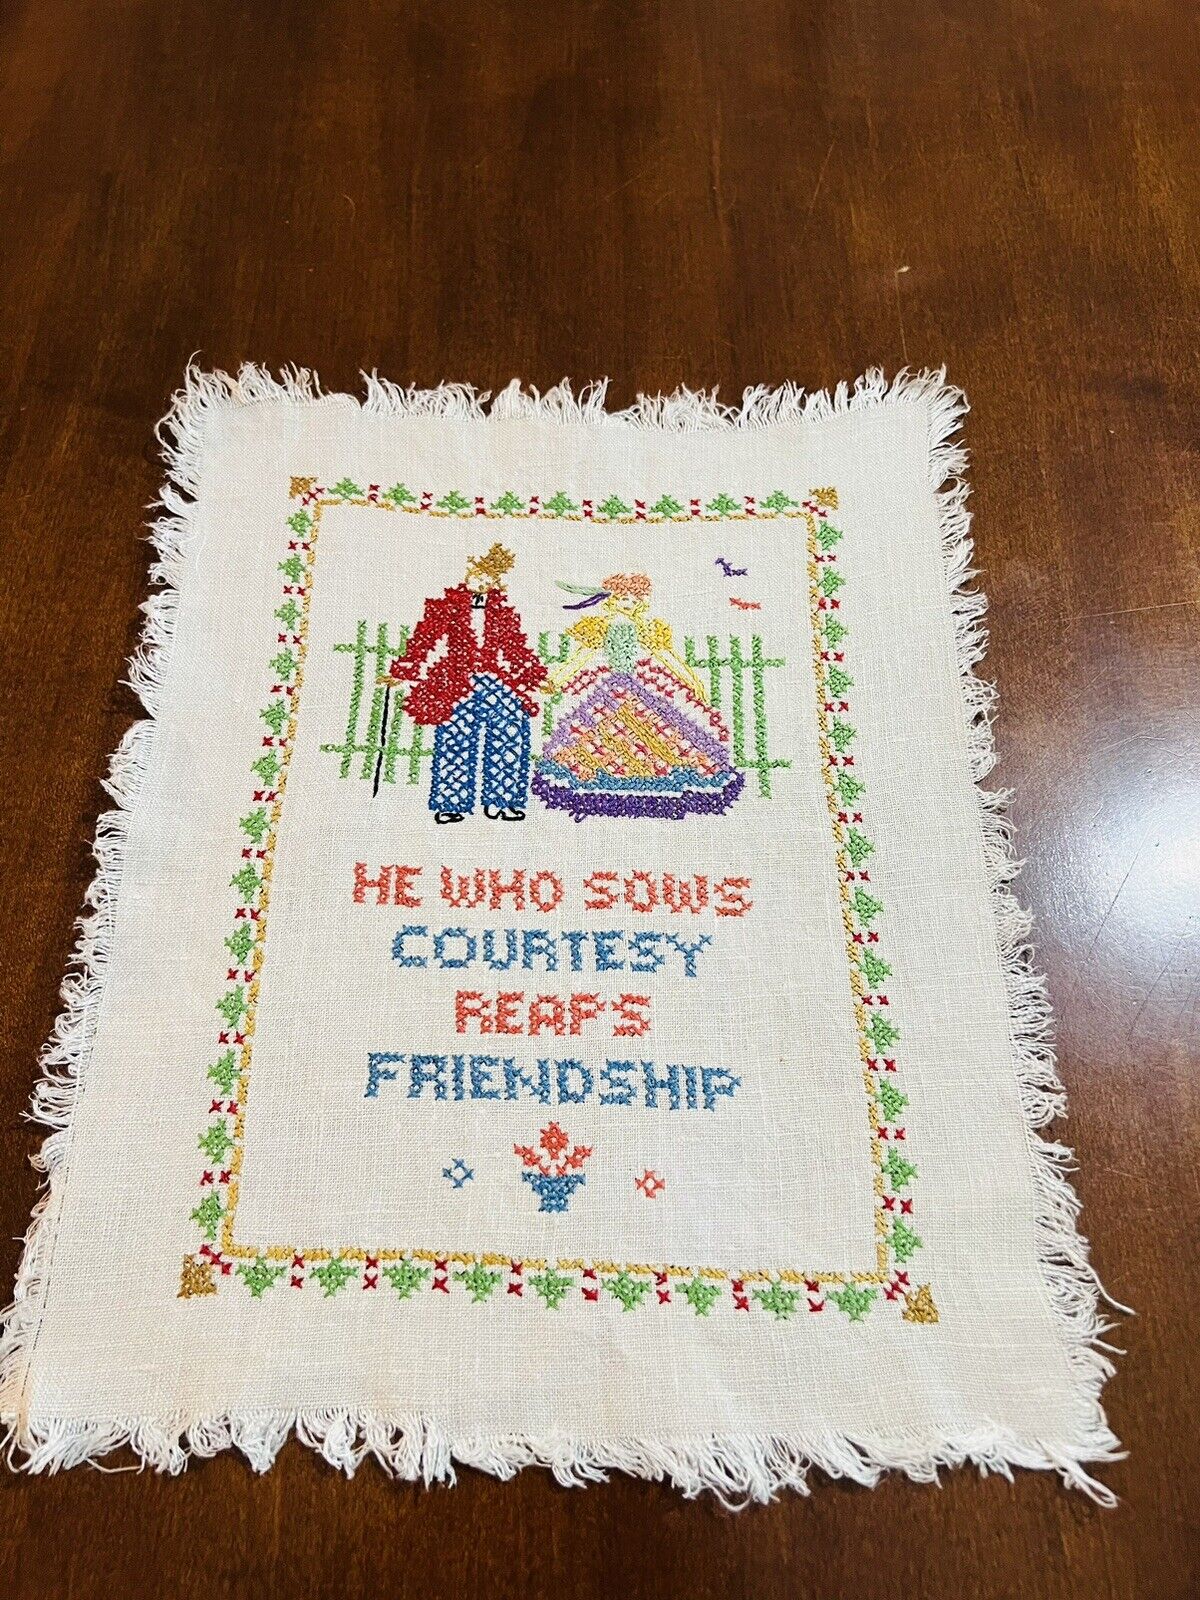 Vintage Hand Embroidered Sampler Courting Couple Picket Fence and Quote